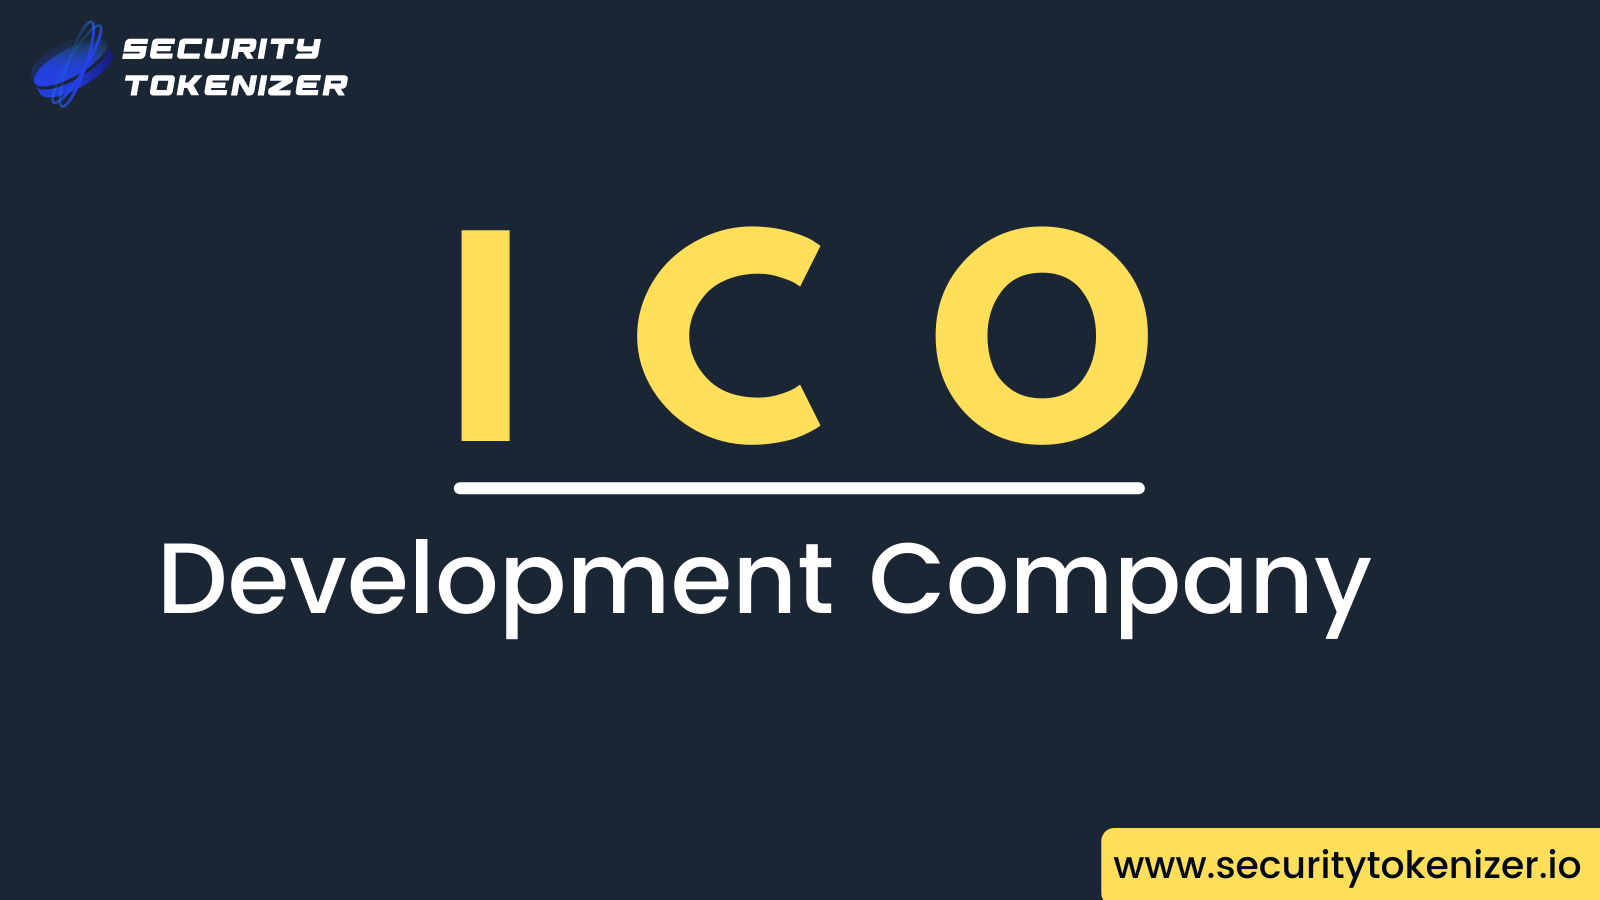 ICO Development Company To Create ICO Tokens and Launch Your ICO